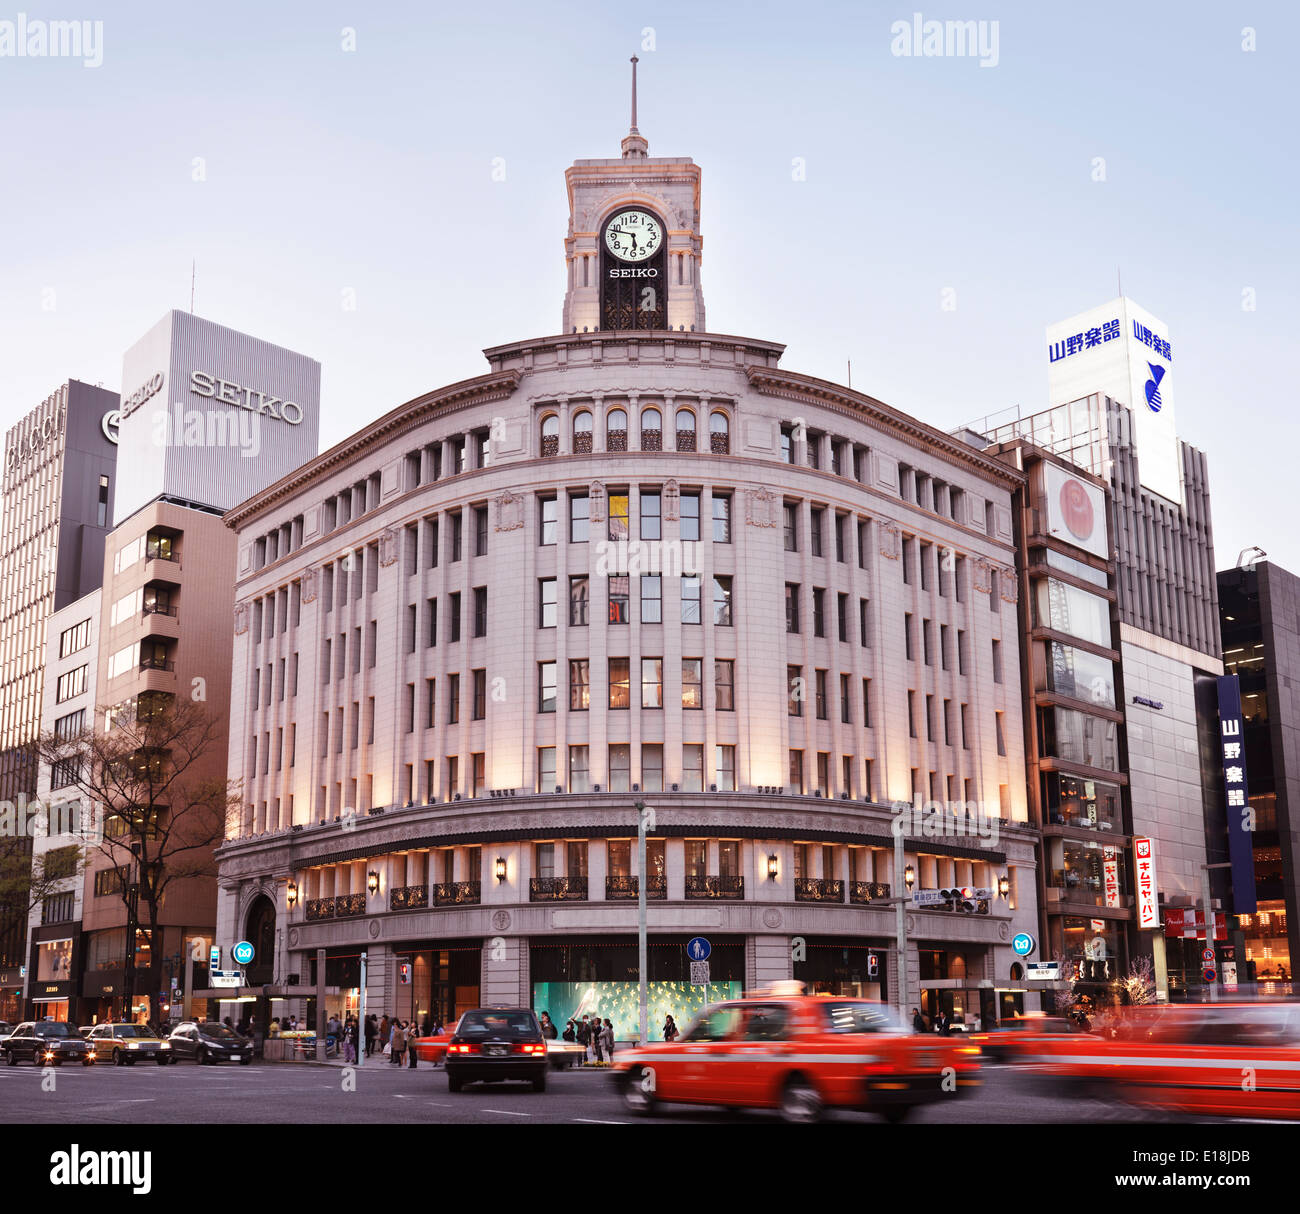 Wako Department Store building with Seiko clock in Ginza, Tokyo, Japan 2014. Stock Photo